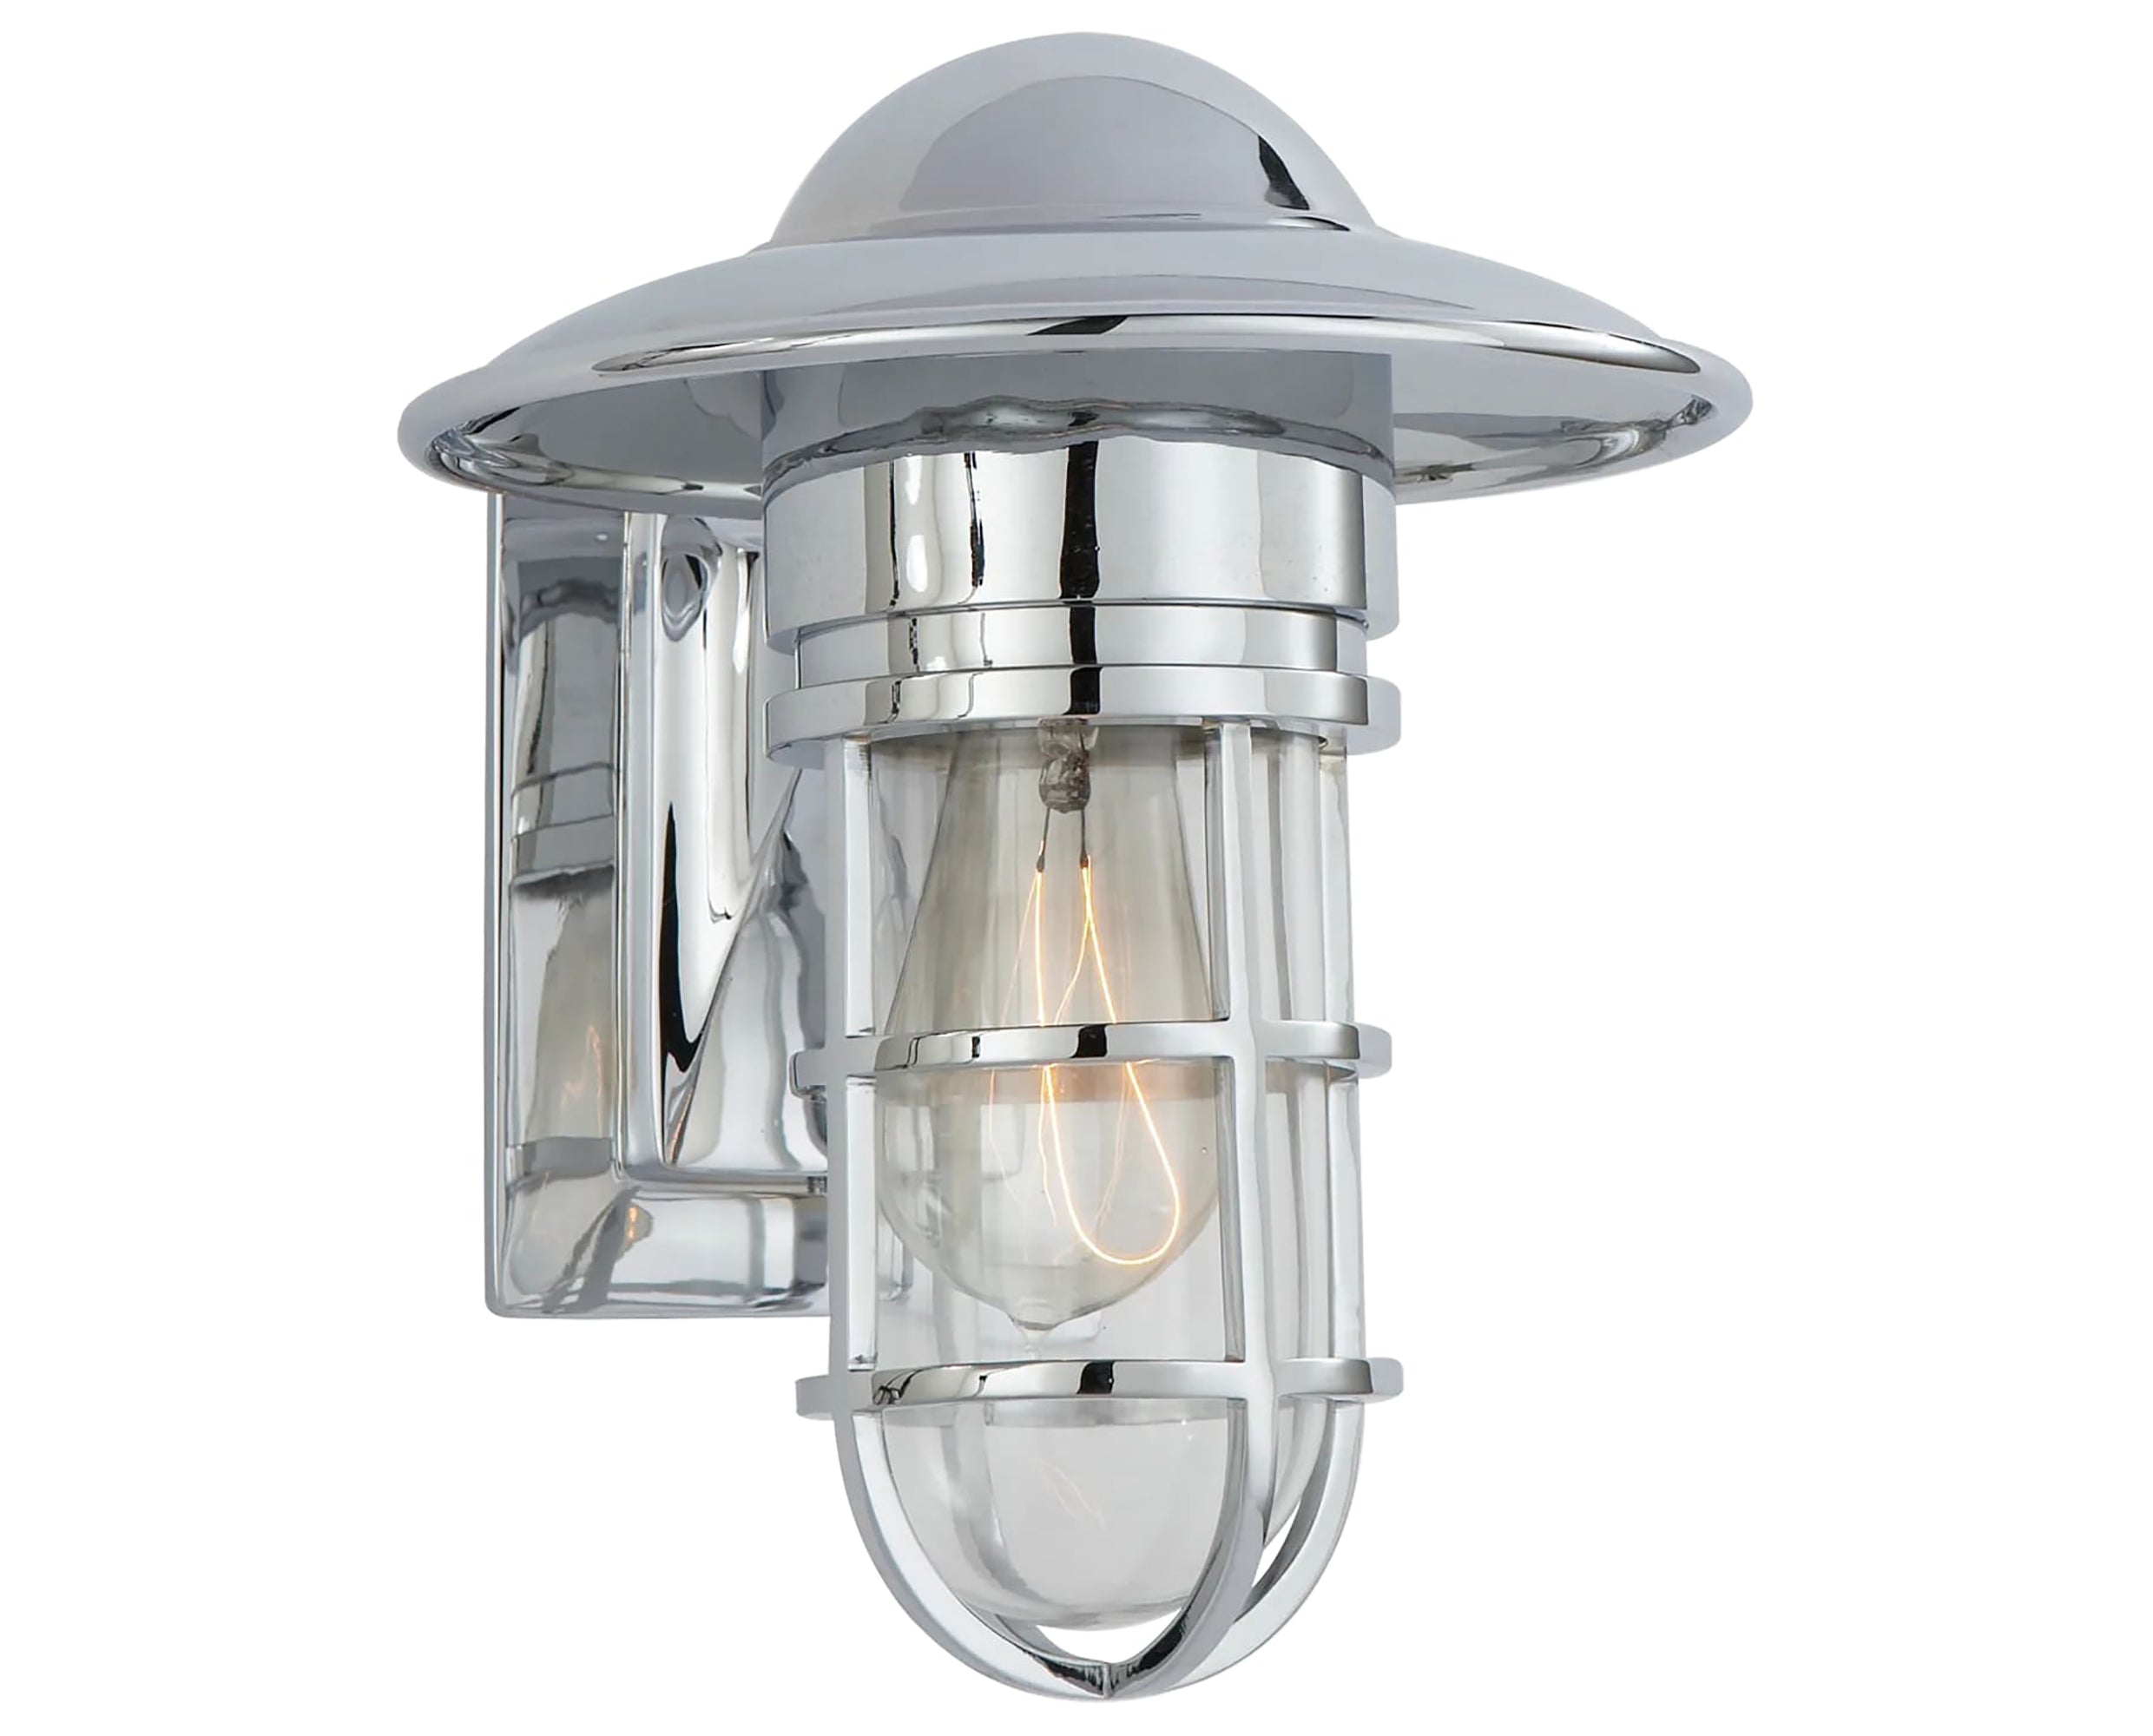 Chrome & Clear Glass | Marine Indoor/Outdoor Wall Light | Valley Ridge Furniture